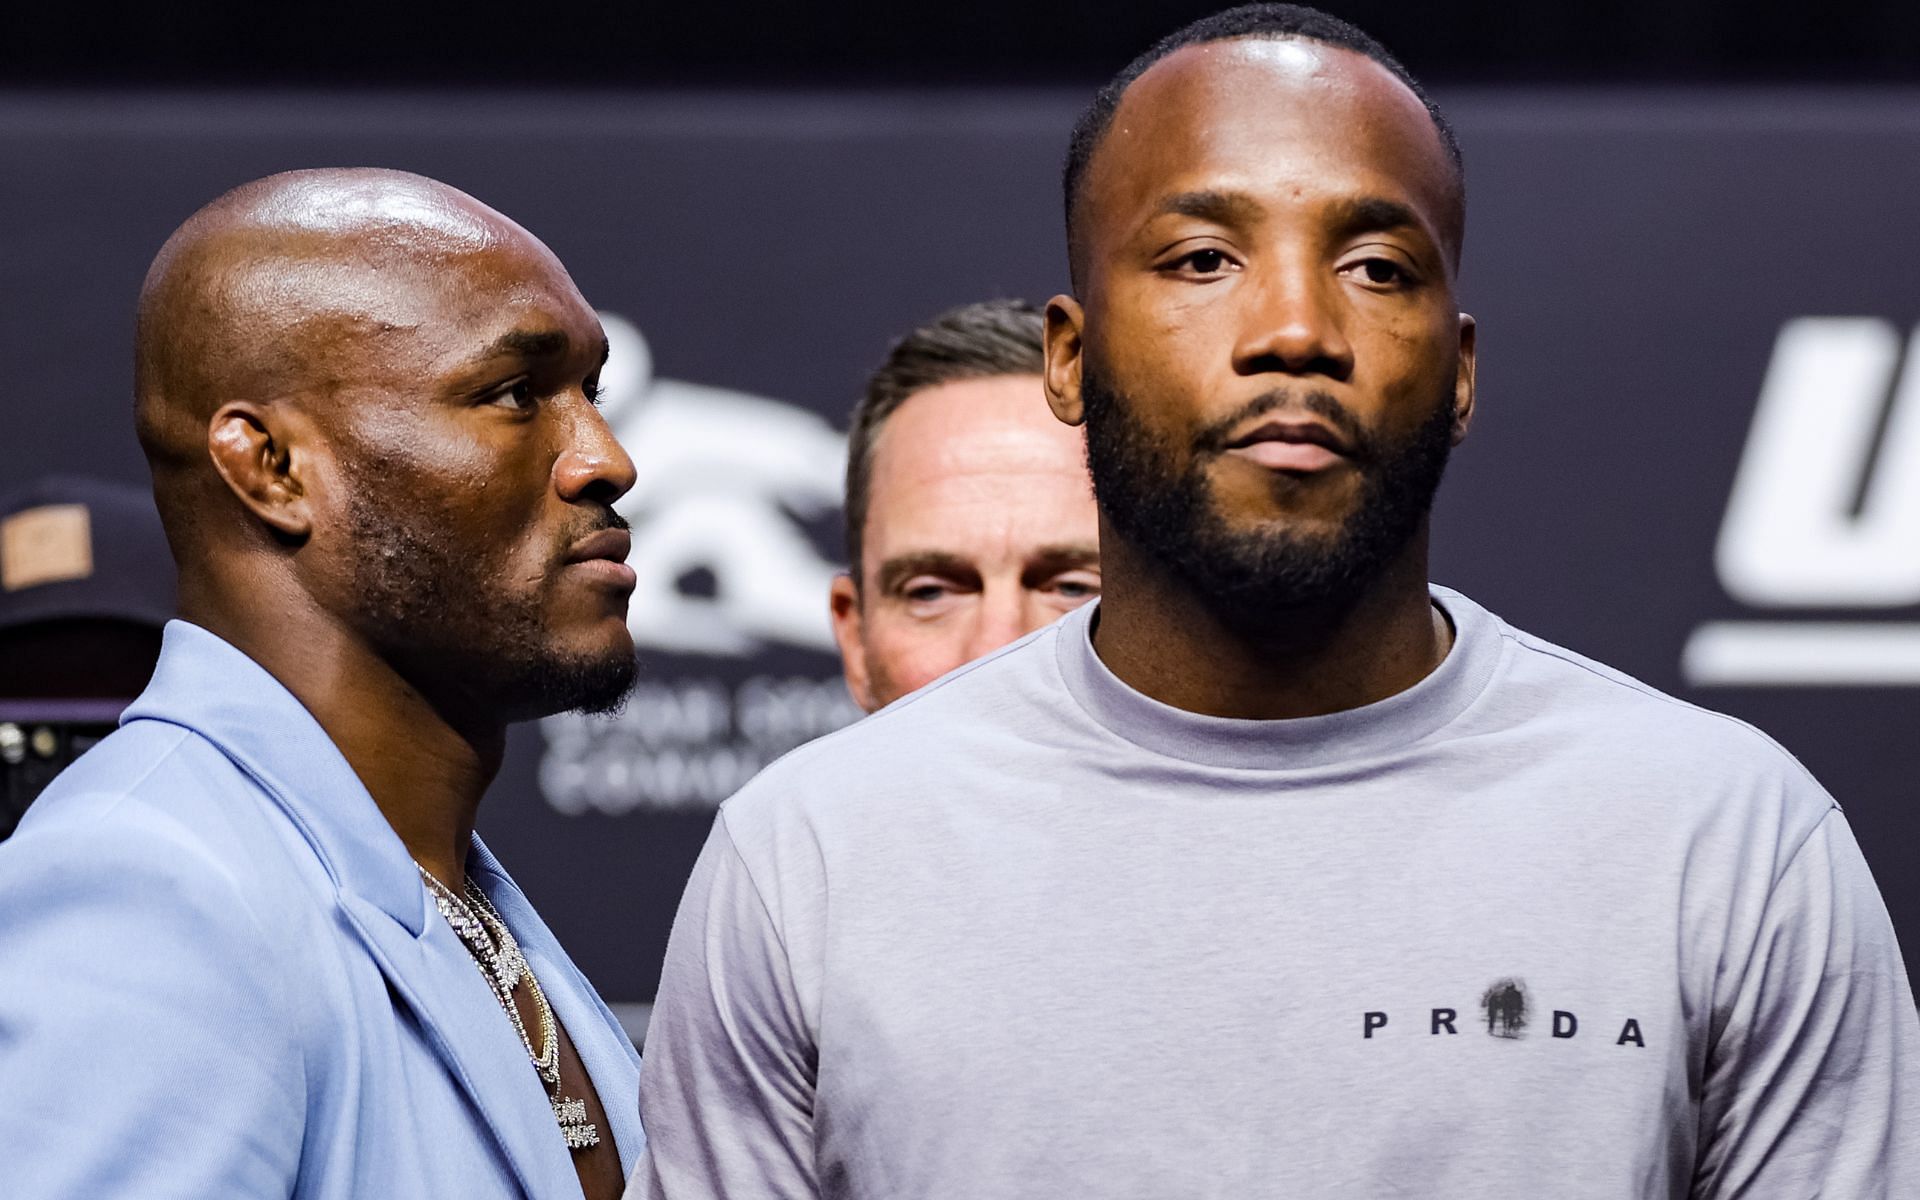 Kamaru Usman (left) has admitted that Leon Edwards (right) could be a dangerous threat in his best form